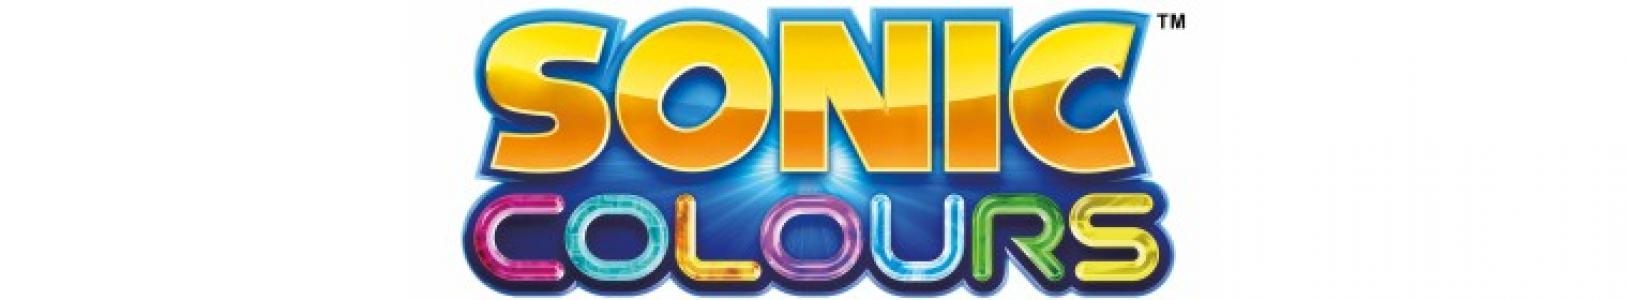 Sonic Colors banner